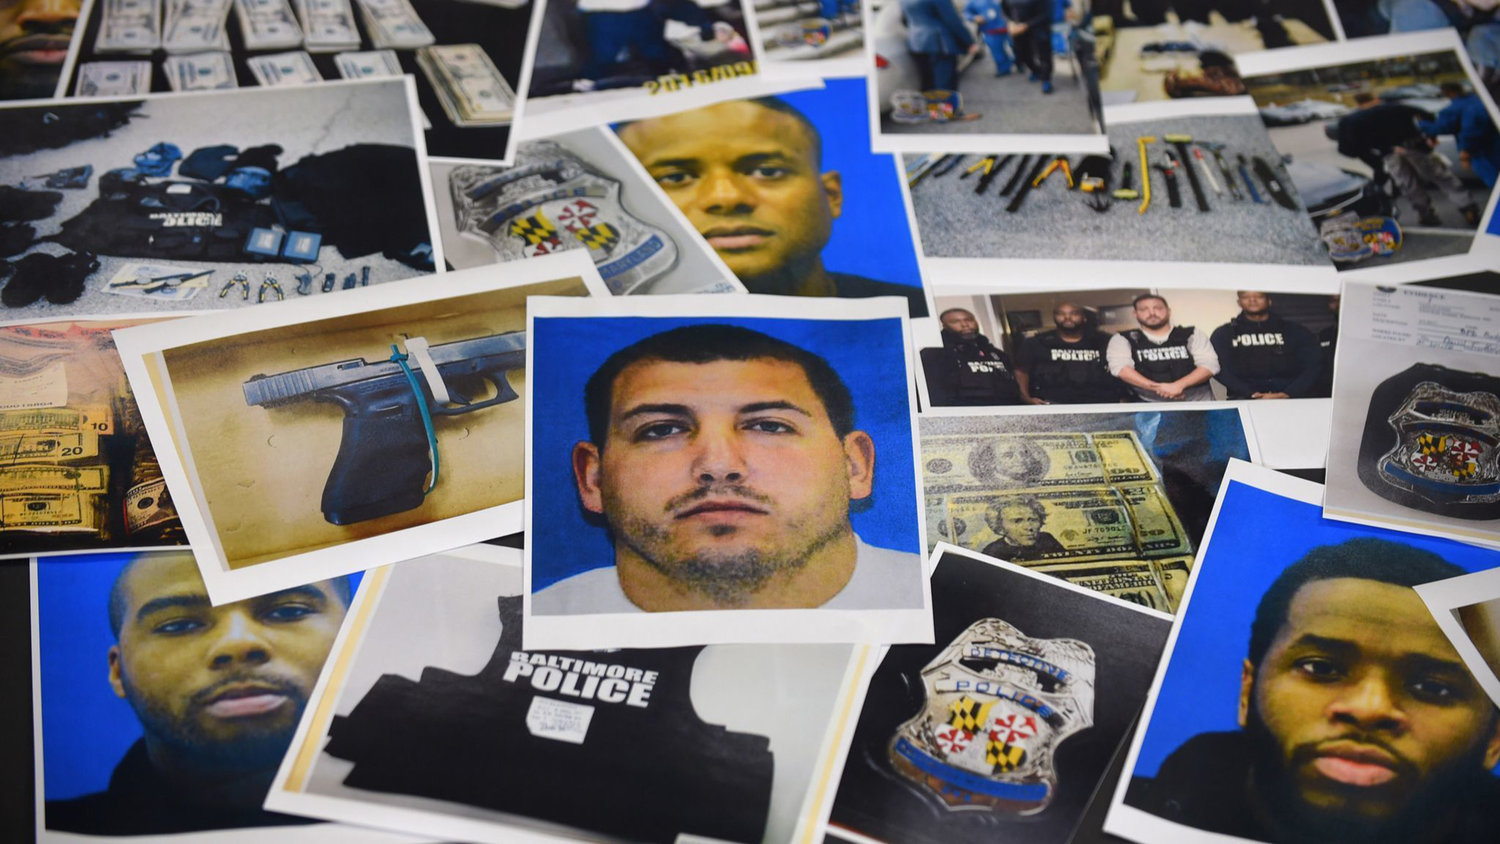 When seven officers from the Gun Trace Task Force were arrested in 2017, the sprawling case was shocking. Plain clothes officers targeted people, stole hundreds of thousands of dollars, lied about overtime and also conducted searches without warrants. Prosecutors said Sgt. Wayne Jenkins was the ring leader of the rogue squad. (Kevin Richardson/The Baltimore Sun/TNS)